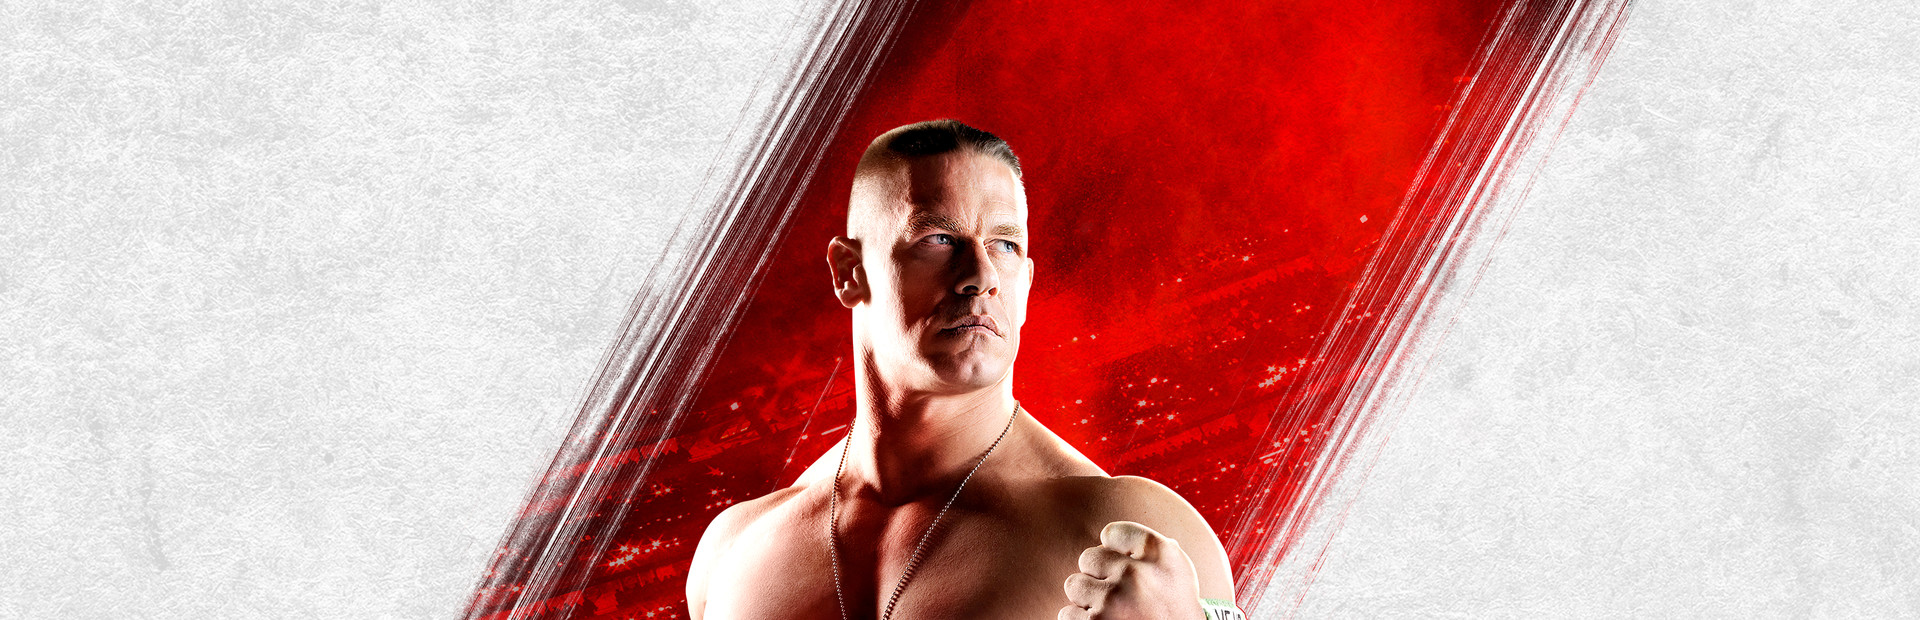 WWE 2K15 cover image